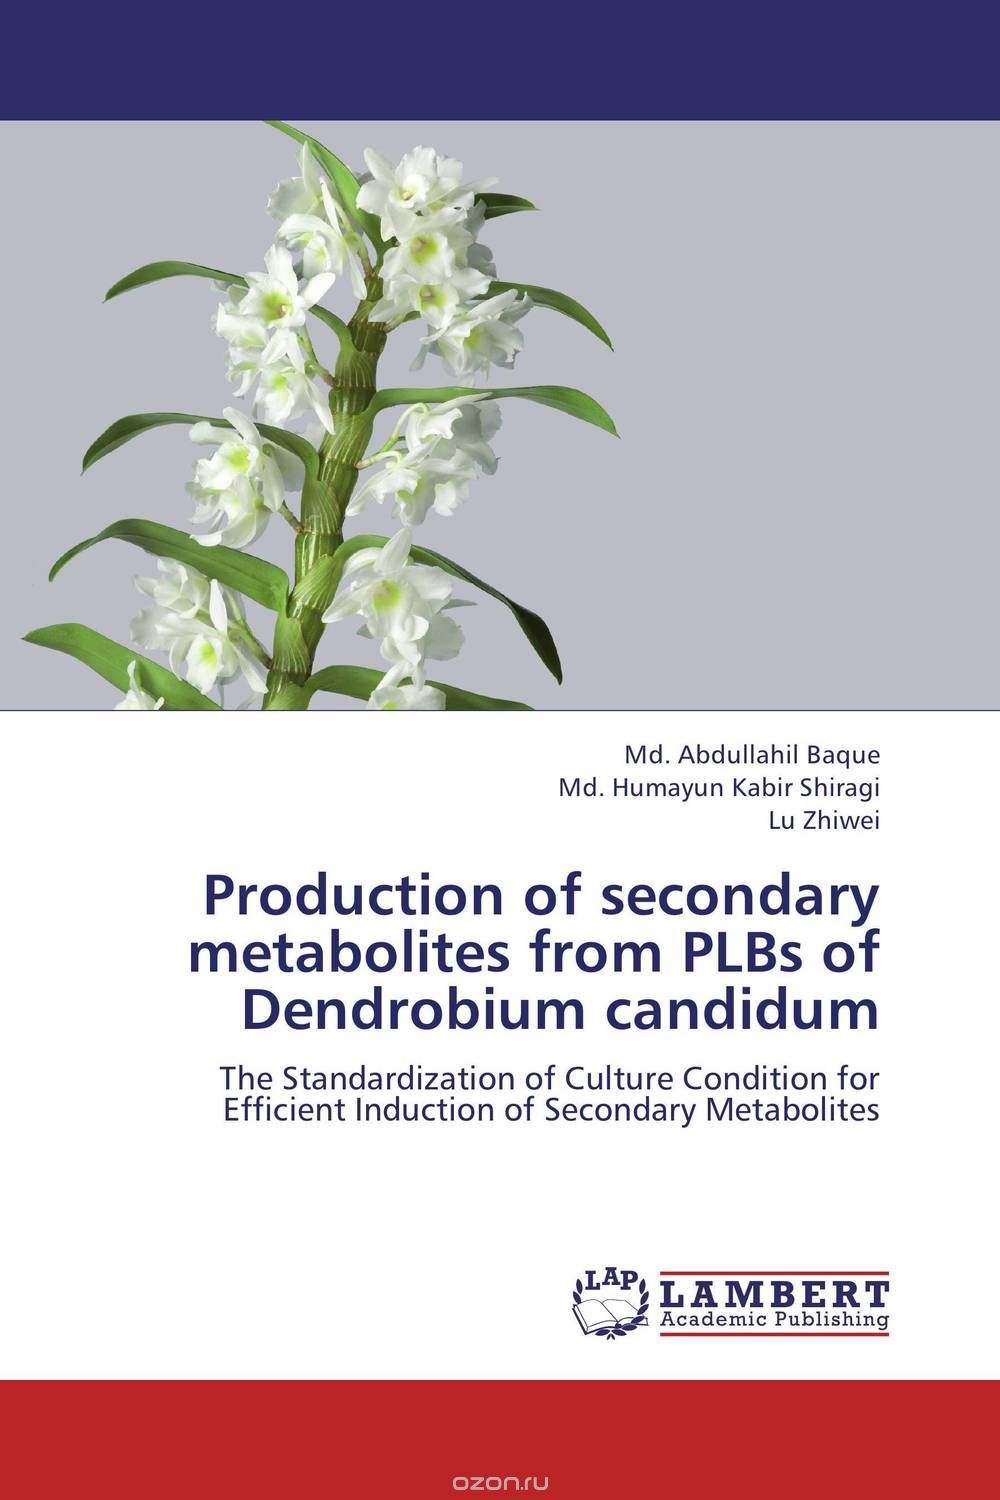 Production of secondary metabolites from PLBs of Dendrobium candidum